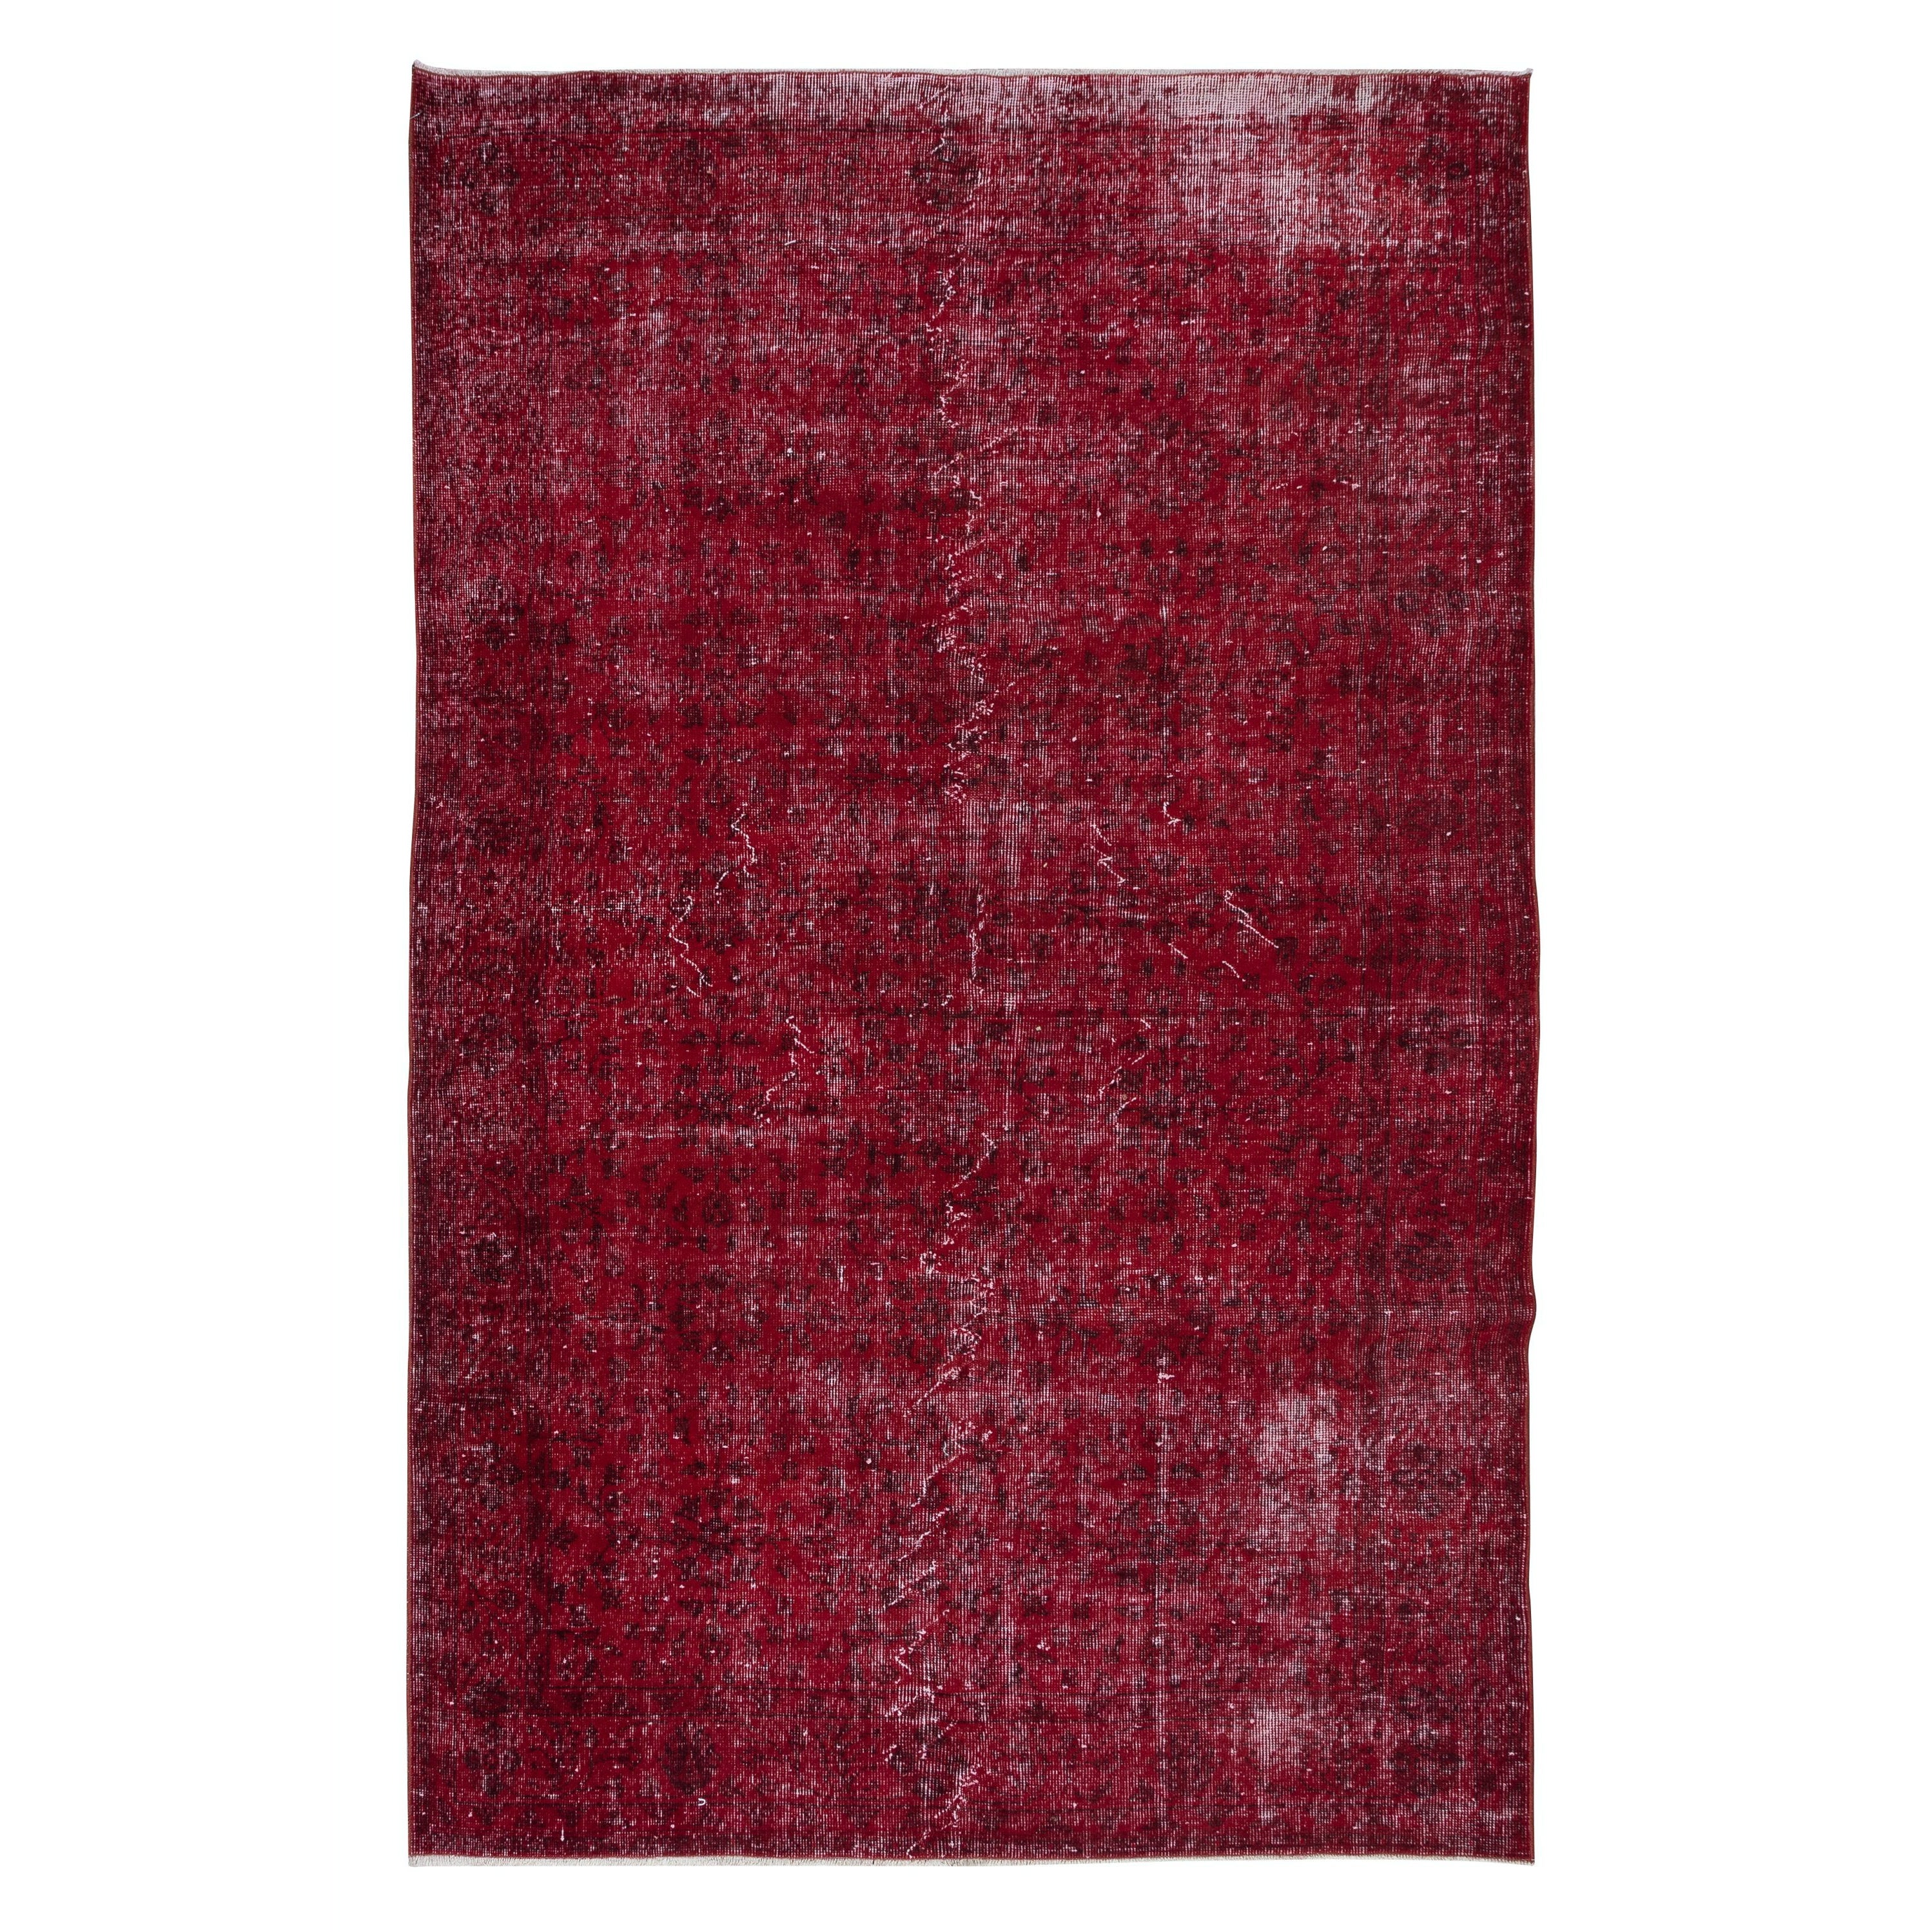 5.7x9 Ft Contemporary Wool Area Rug in Red, Handmade in Turkey For Sale